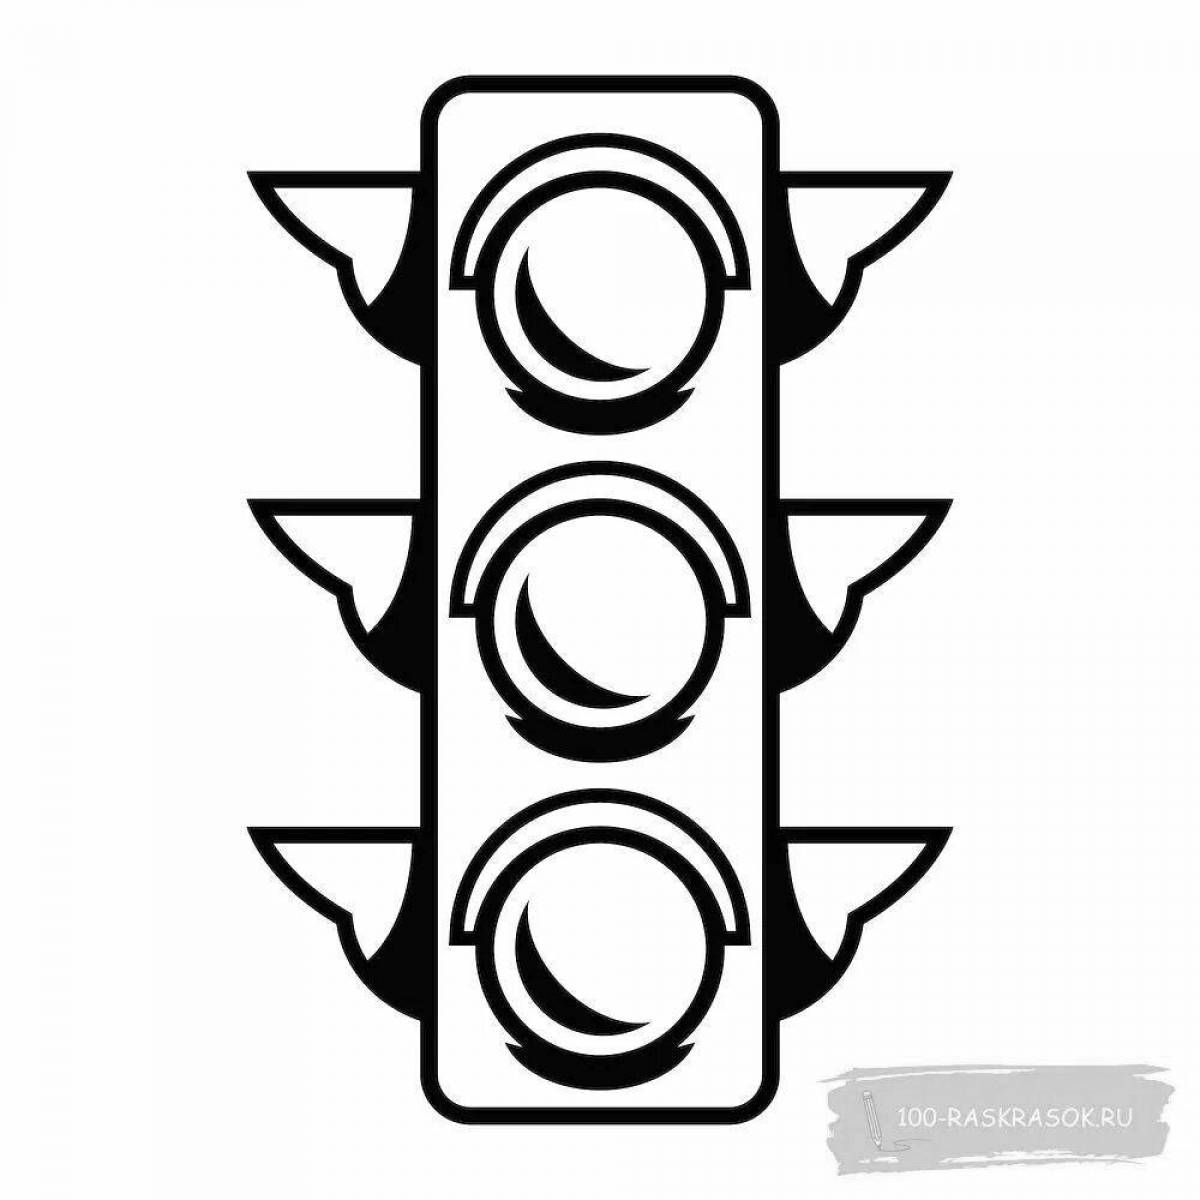 Glowing traffic light coloring page for kids 2-3 years old